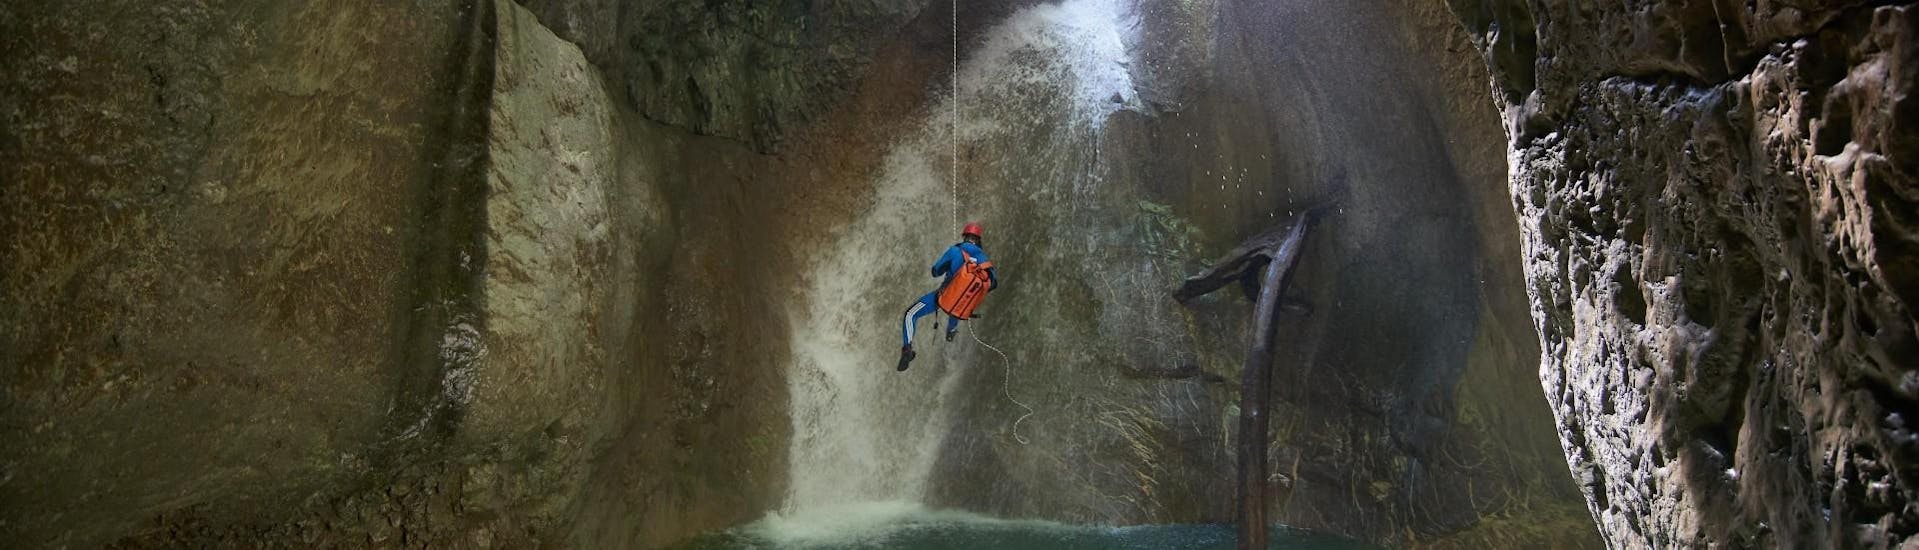 Abseiling while Canyoning in the Auerklamm from Haiming - Jurassic Tour with Outdoor Ötztal.